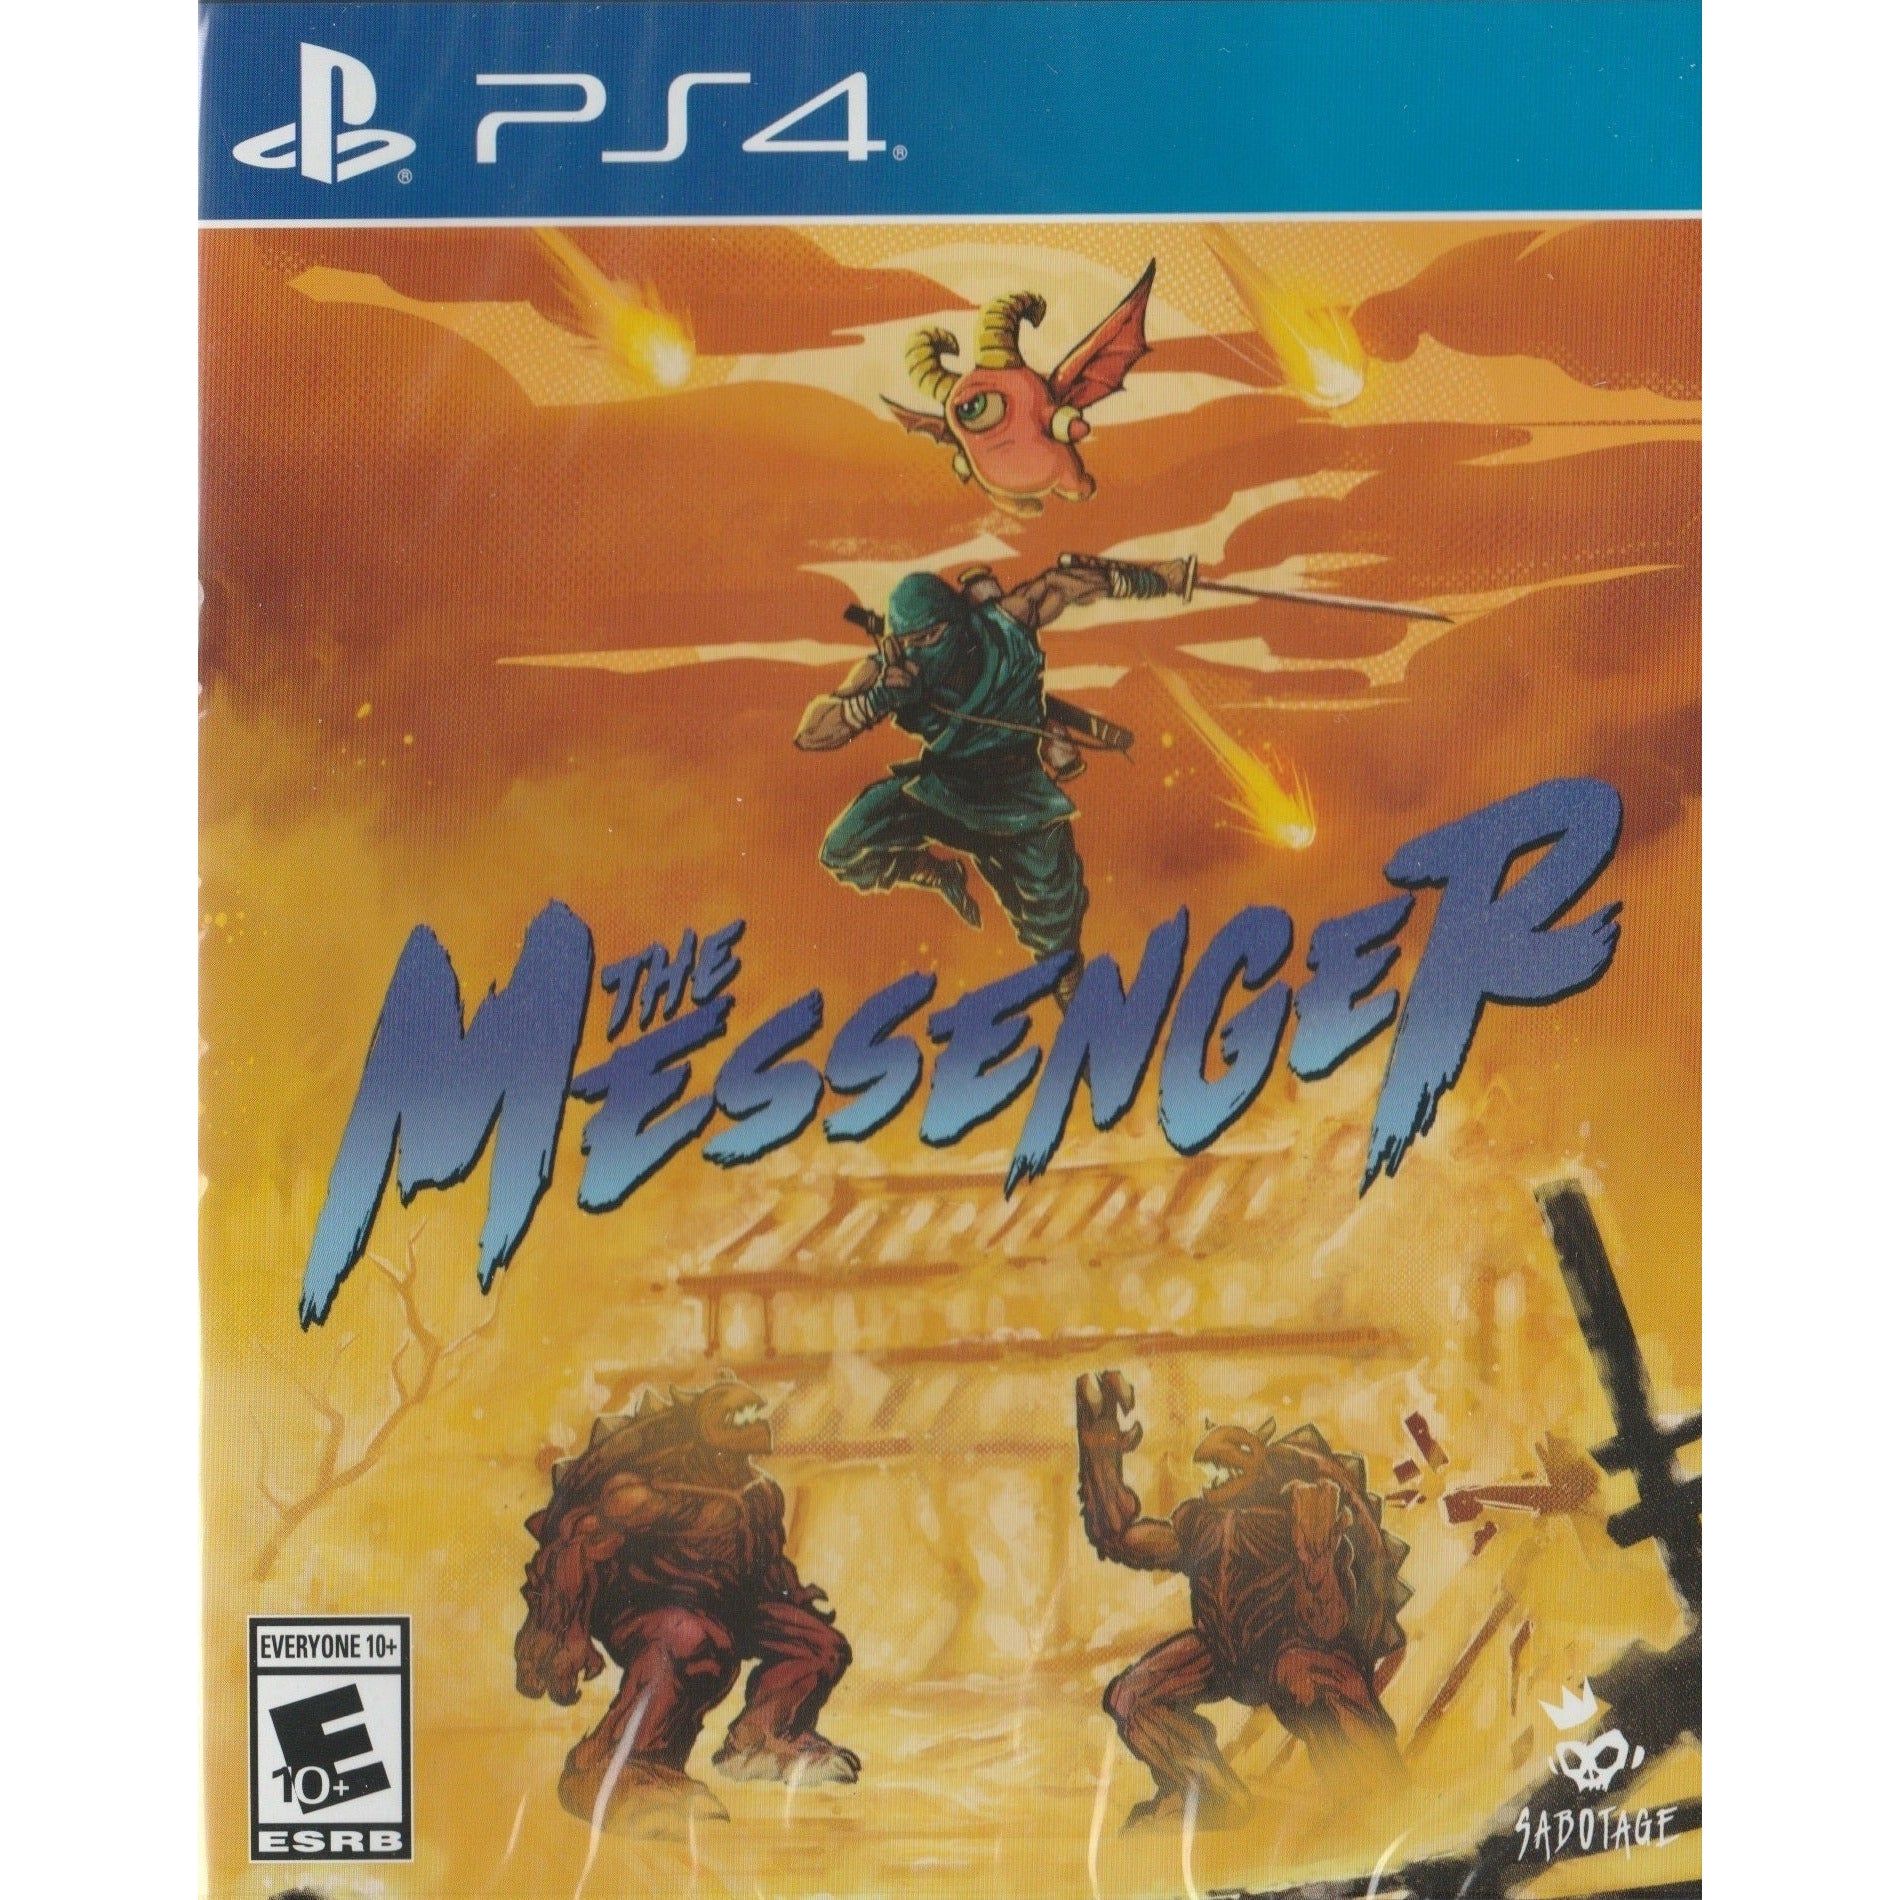 PS4 - The Messenger